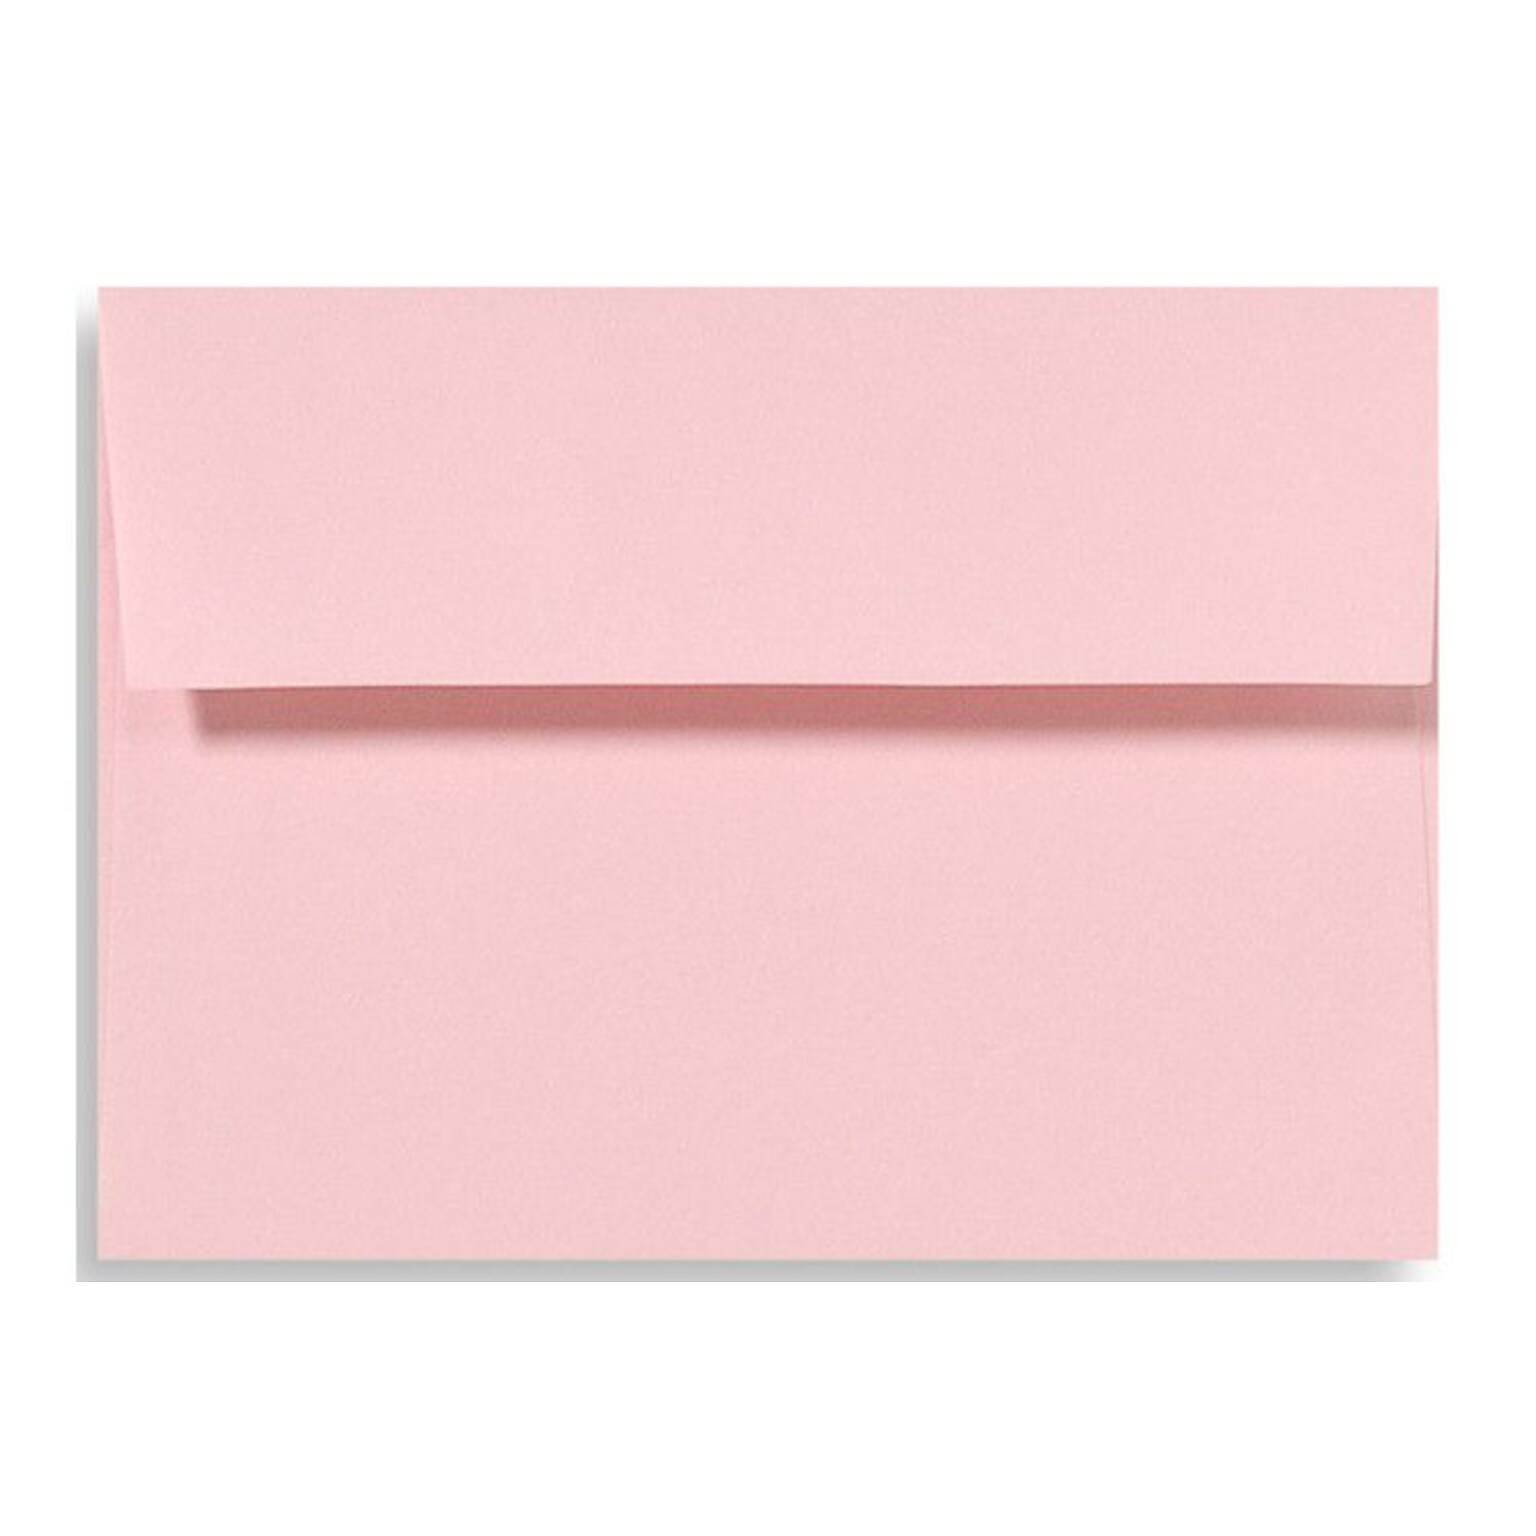 LUX A6 Invitation Envelopes (4 3/4 x 6 1/2) 250/Box, Candy Pink (EX4875-14-250)